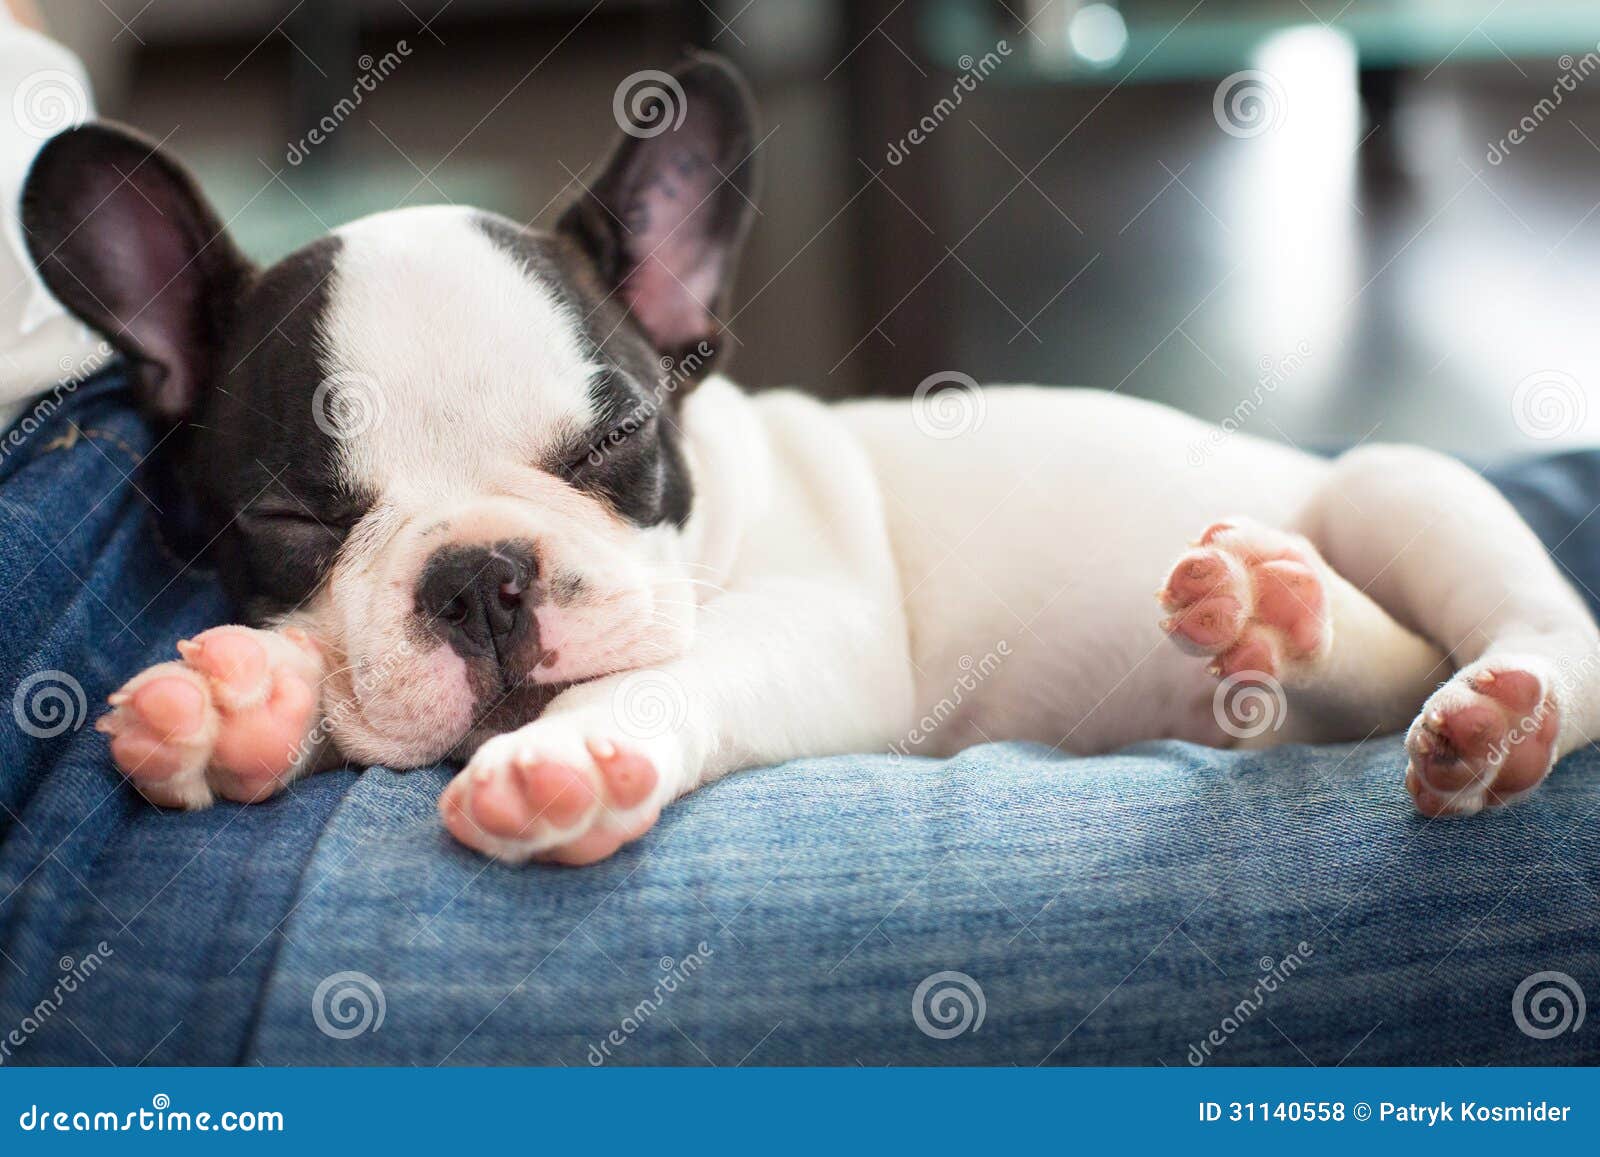 Cute Adorable French Bulldogs That Will Melt Your Heart - Click Now to ...